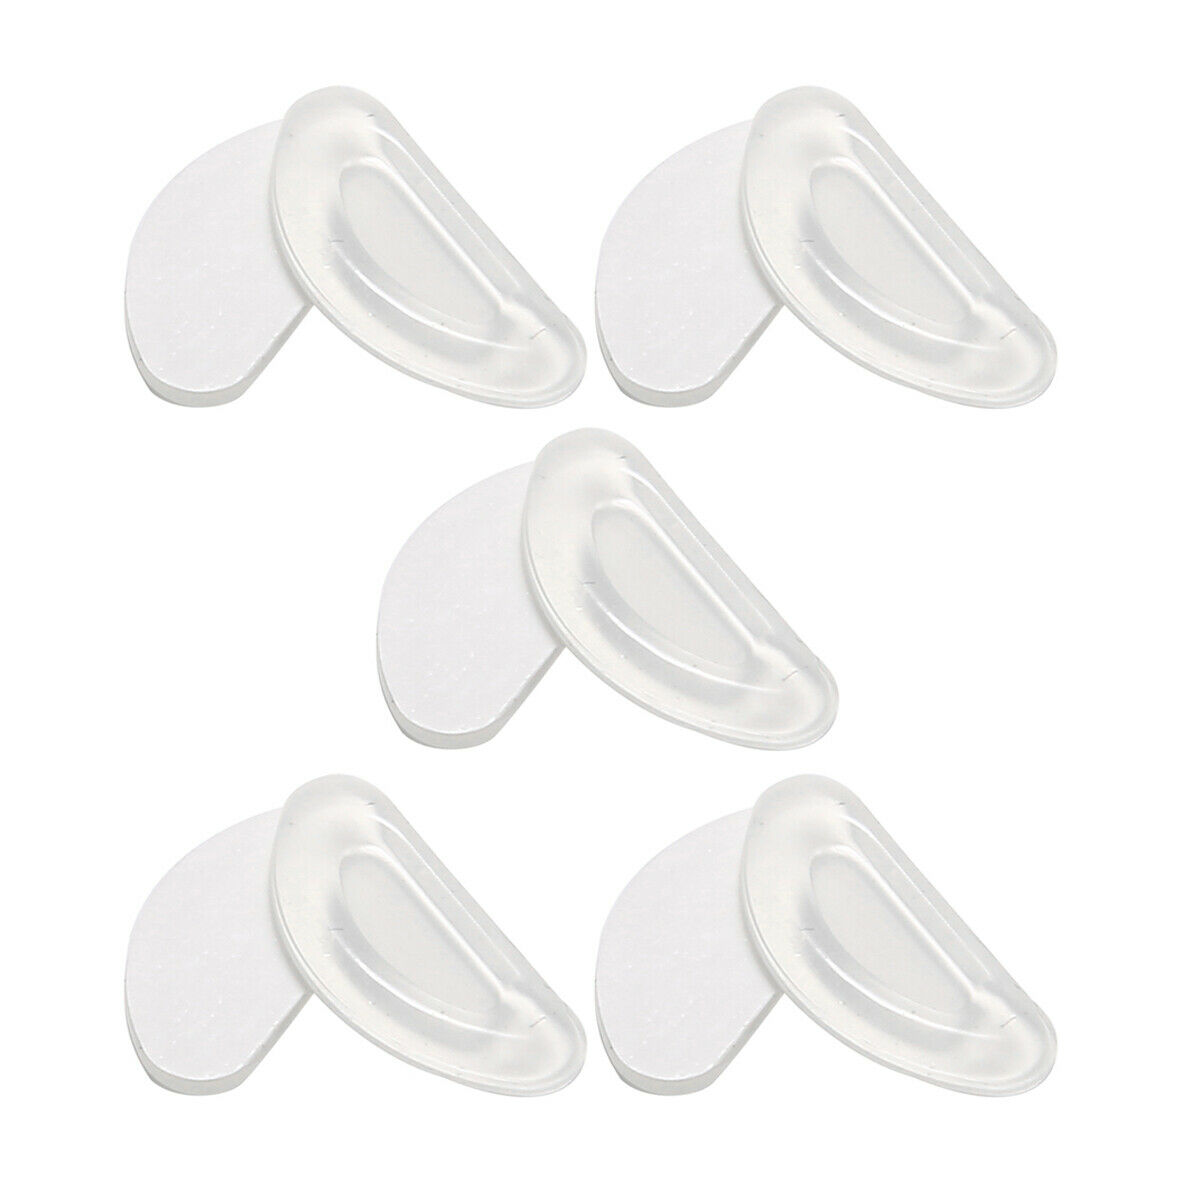 5 Pairs Extra Soft Silicone Nose Pads For Glasses Spectacles Non Slip Ebay